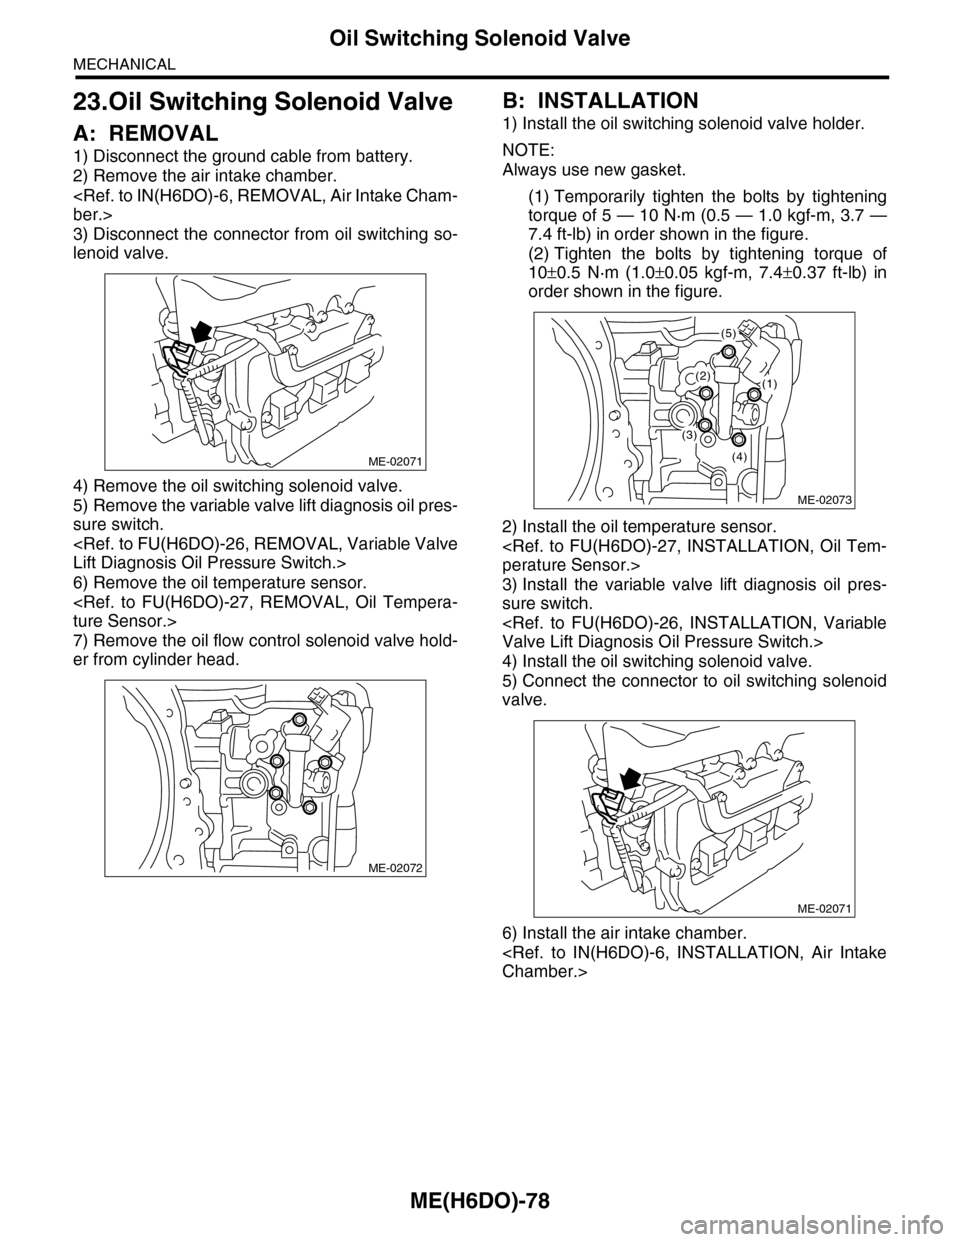 SUBARU TRIBECA 2009 1.G Service Workshop Manual ME(H6DO)-78
Oil Switching Solenoid Valve
MECHANICAL
23.Oil Switching Solenoid Valve
A: REMOVAL
1) Disconnect the ground cable from battery.
2) Remove the air intake chamber.
<Ref. to IN(H6DO)-6, REMOV